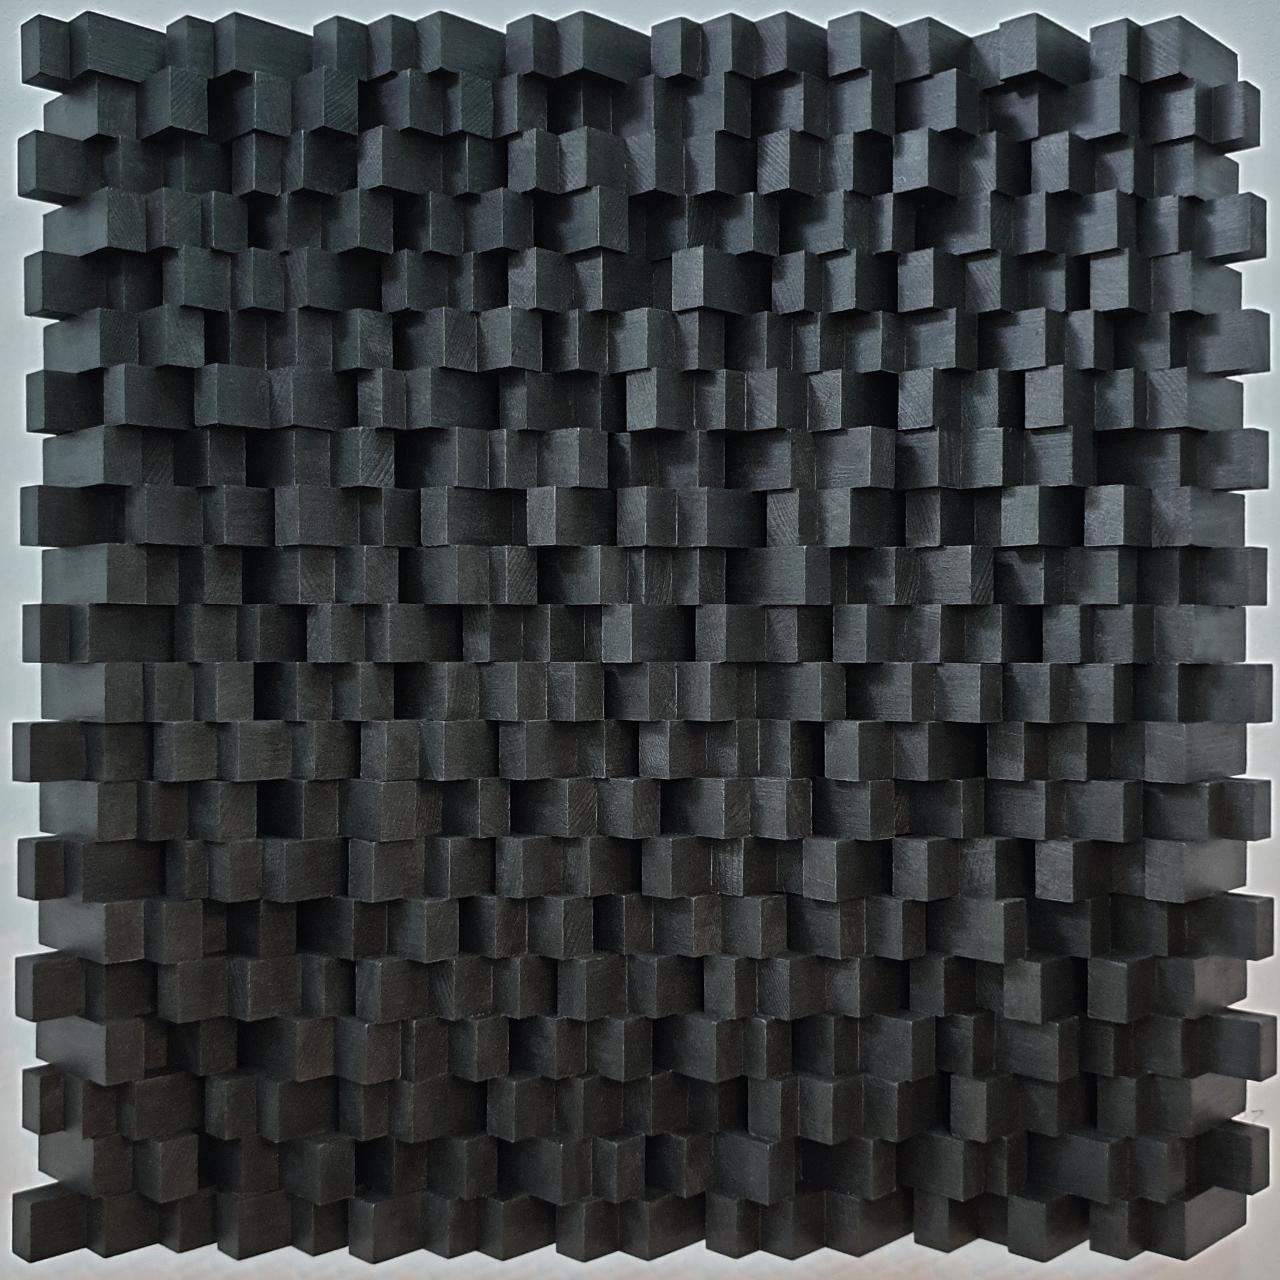 Olivier Julia Abstract Painting - Variation répétitive - black contemporary modern geometric sculpture painting